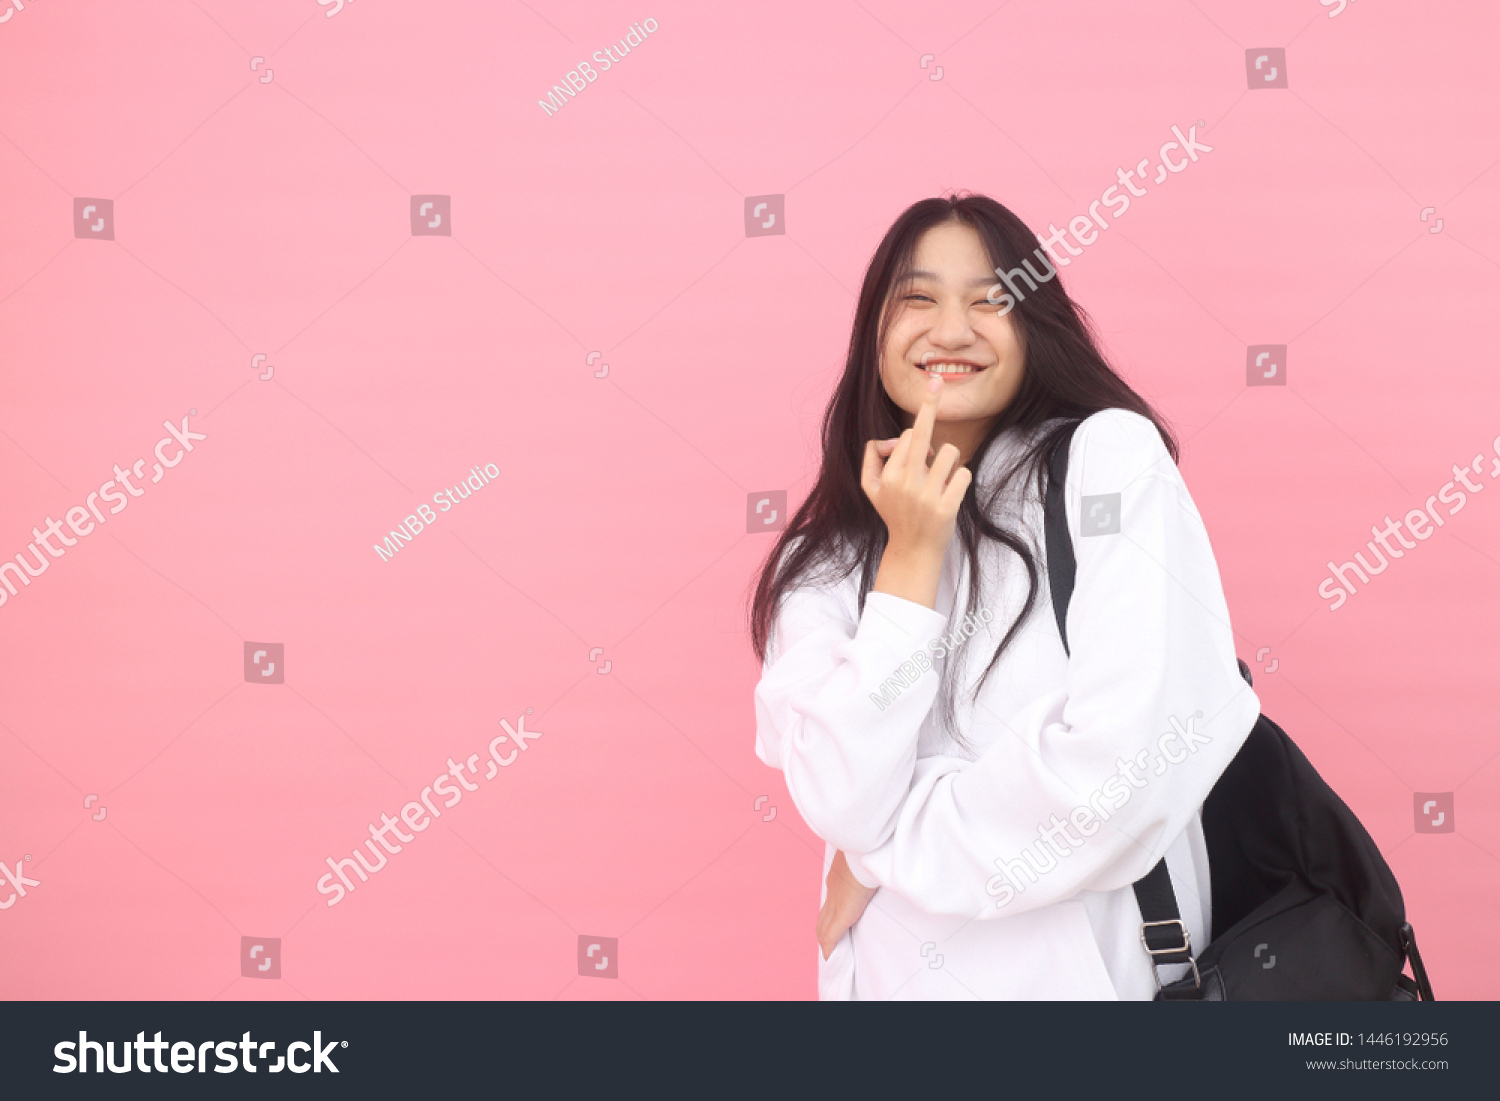 Isolated shot of pretty adult with long hair, broad smile, wears casual outfit, being entertained by friend during party, tilts head and looks with joy, dressed casually, Beautiful Asian models over   #1446192956